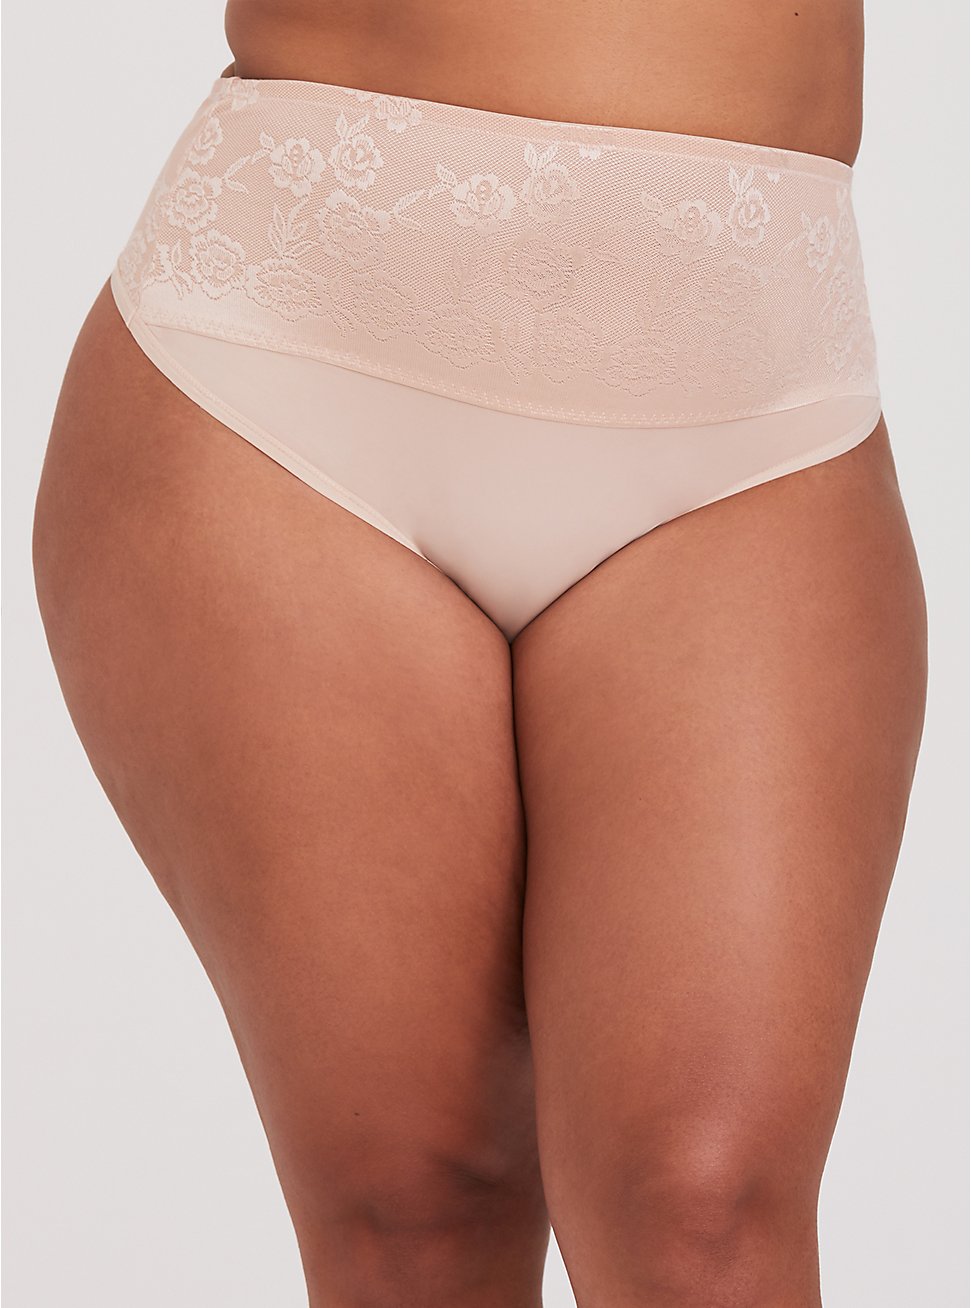 Beige 360° Smoothing™ High Waist Thong Panty, ROSE DUST, hi-res